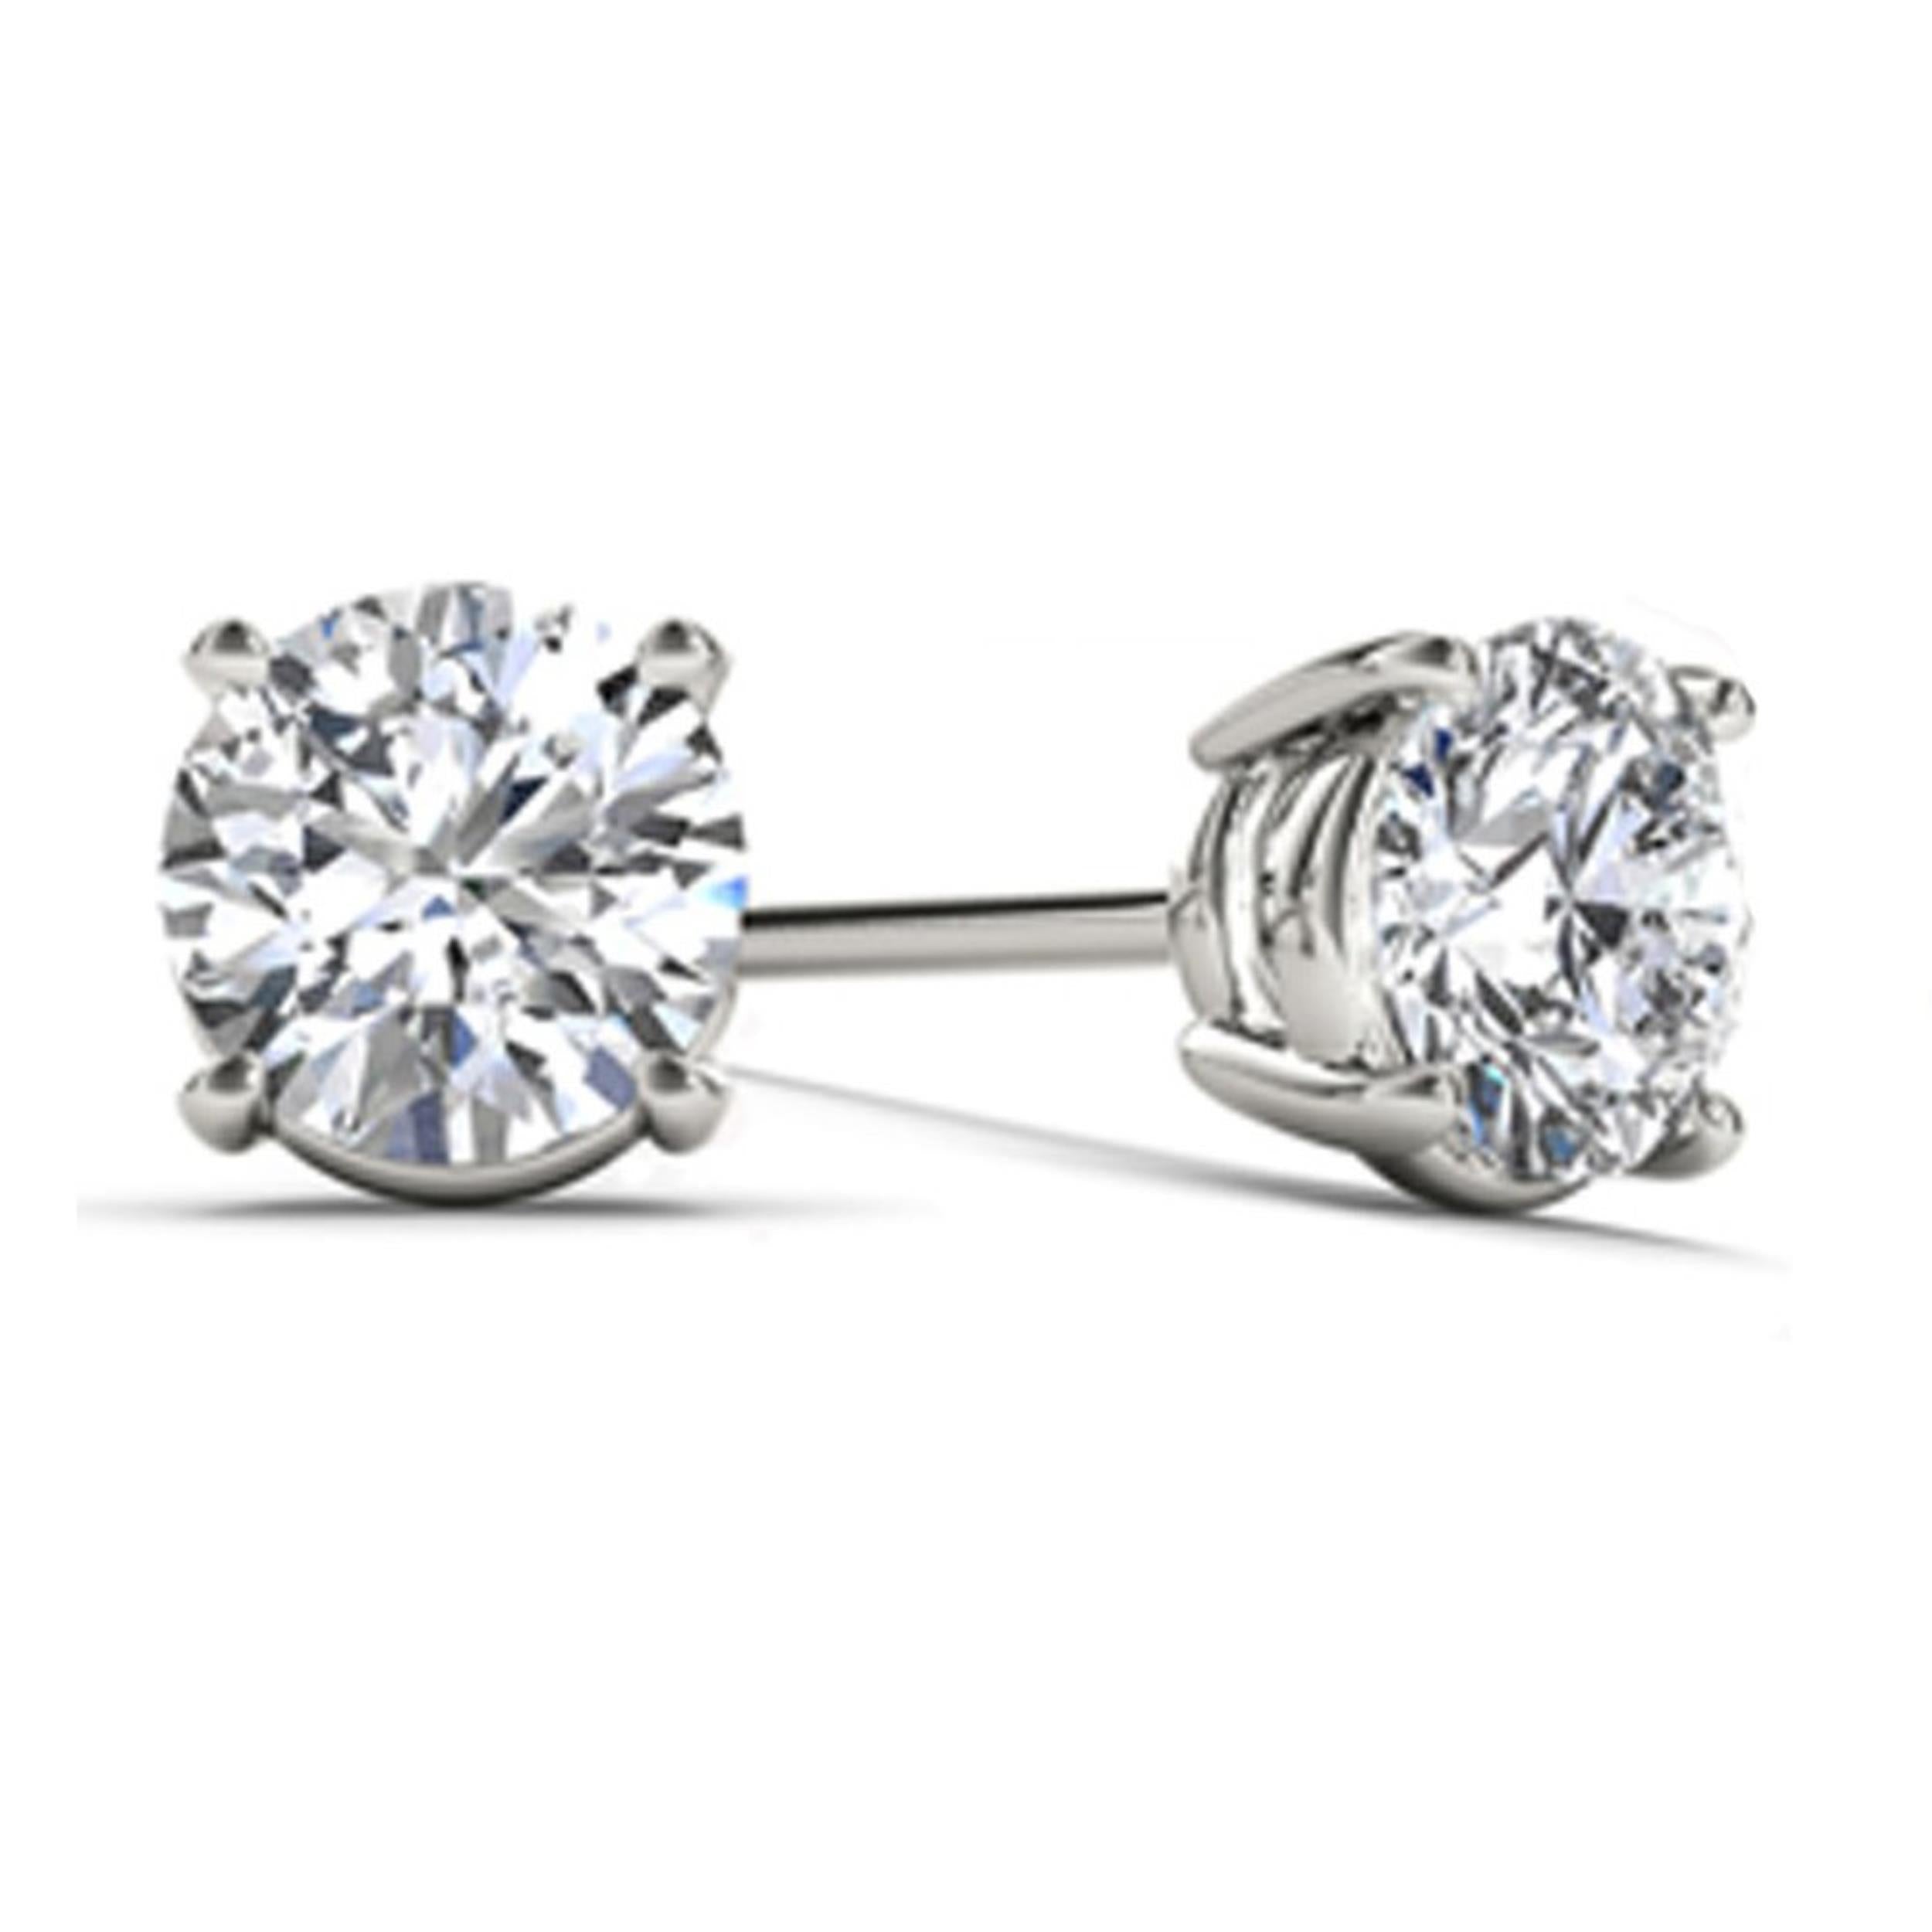 14Kt White Gold 1/2 Ct Genuine Natural Diamond Round Stud Earrings